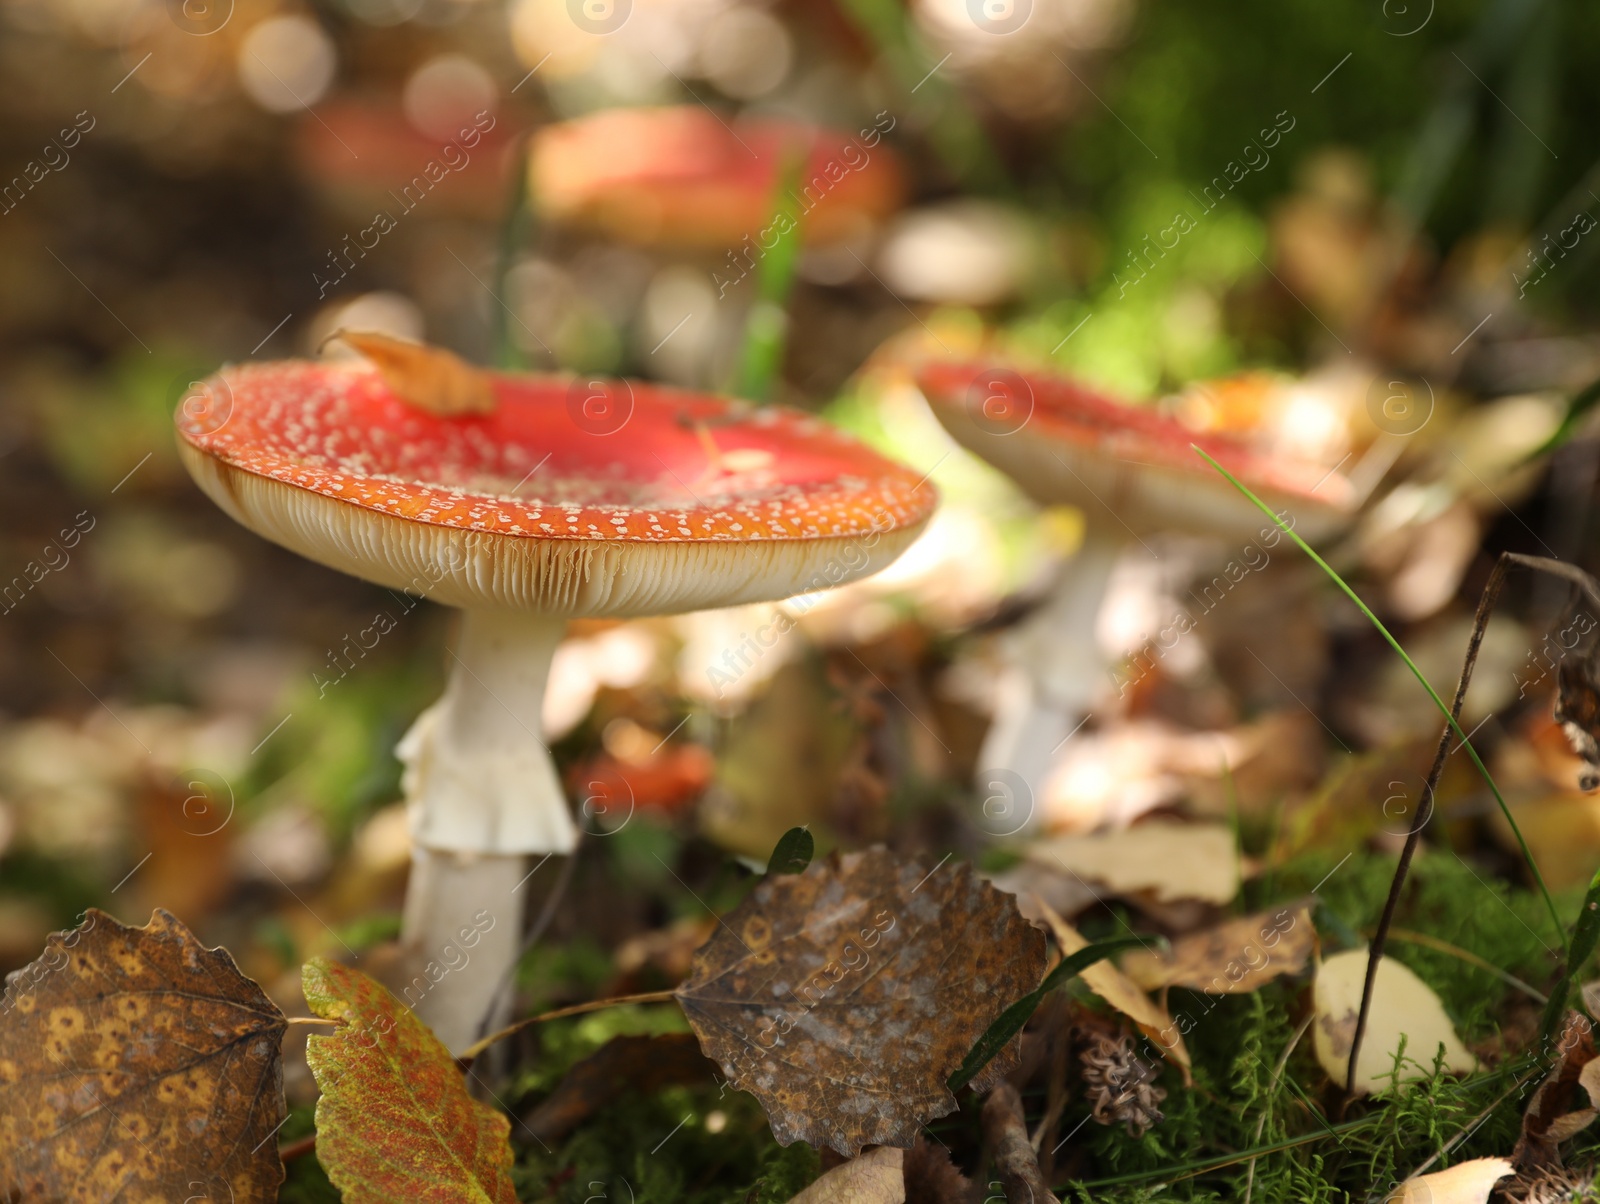 Photo of Mushrooms and fallen leaves growing in forest